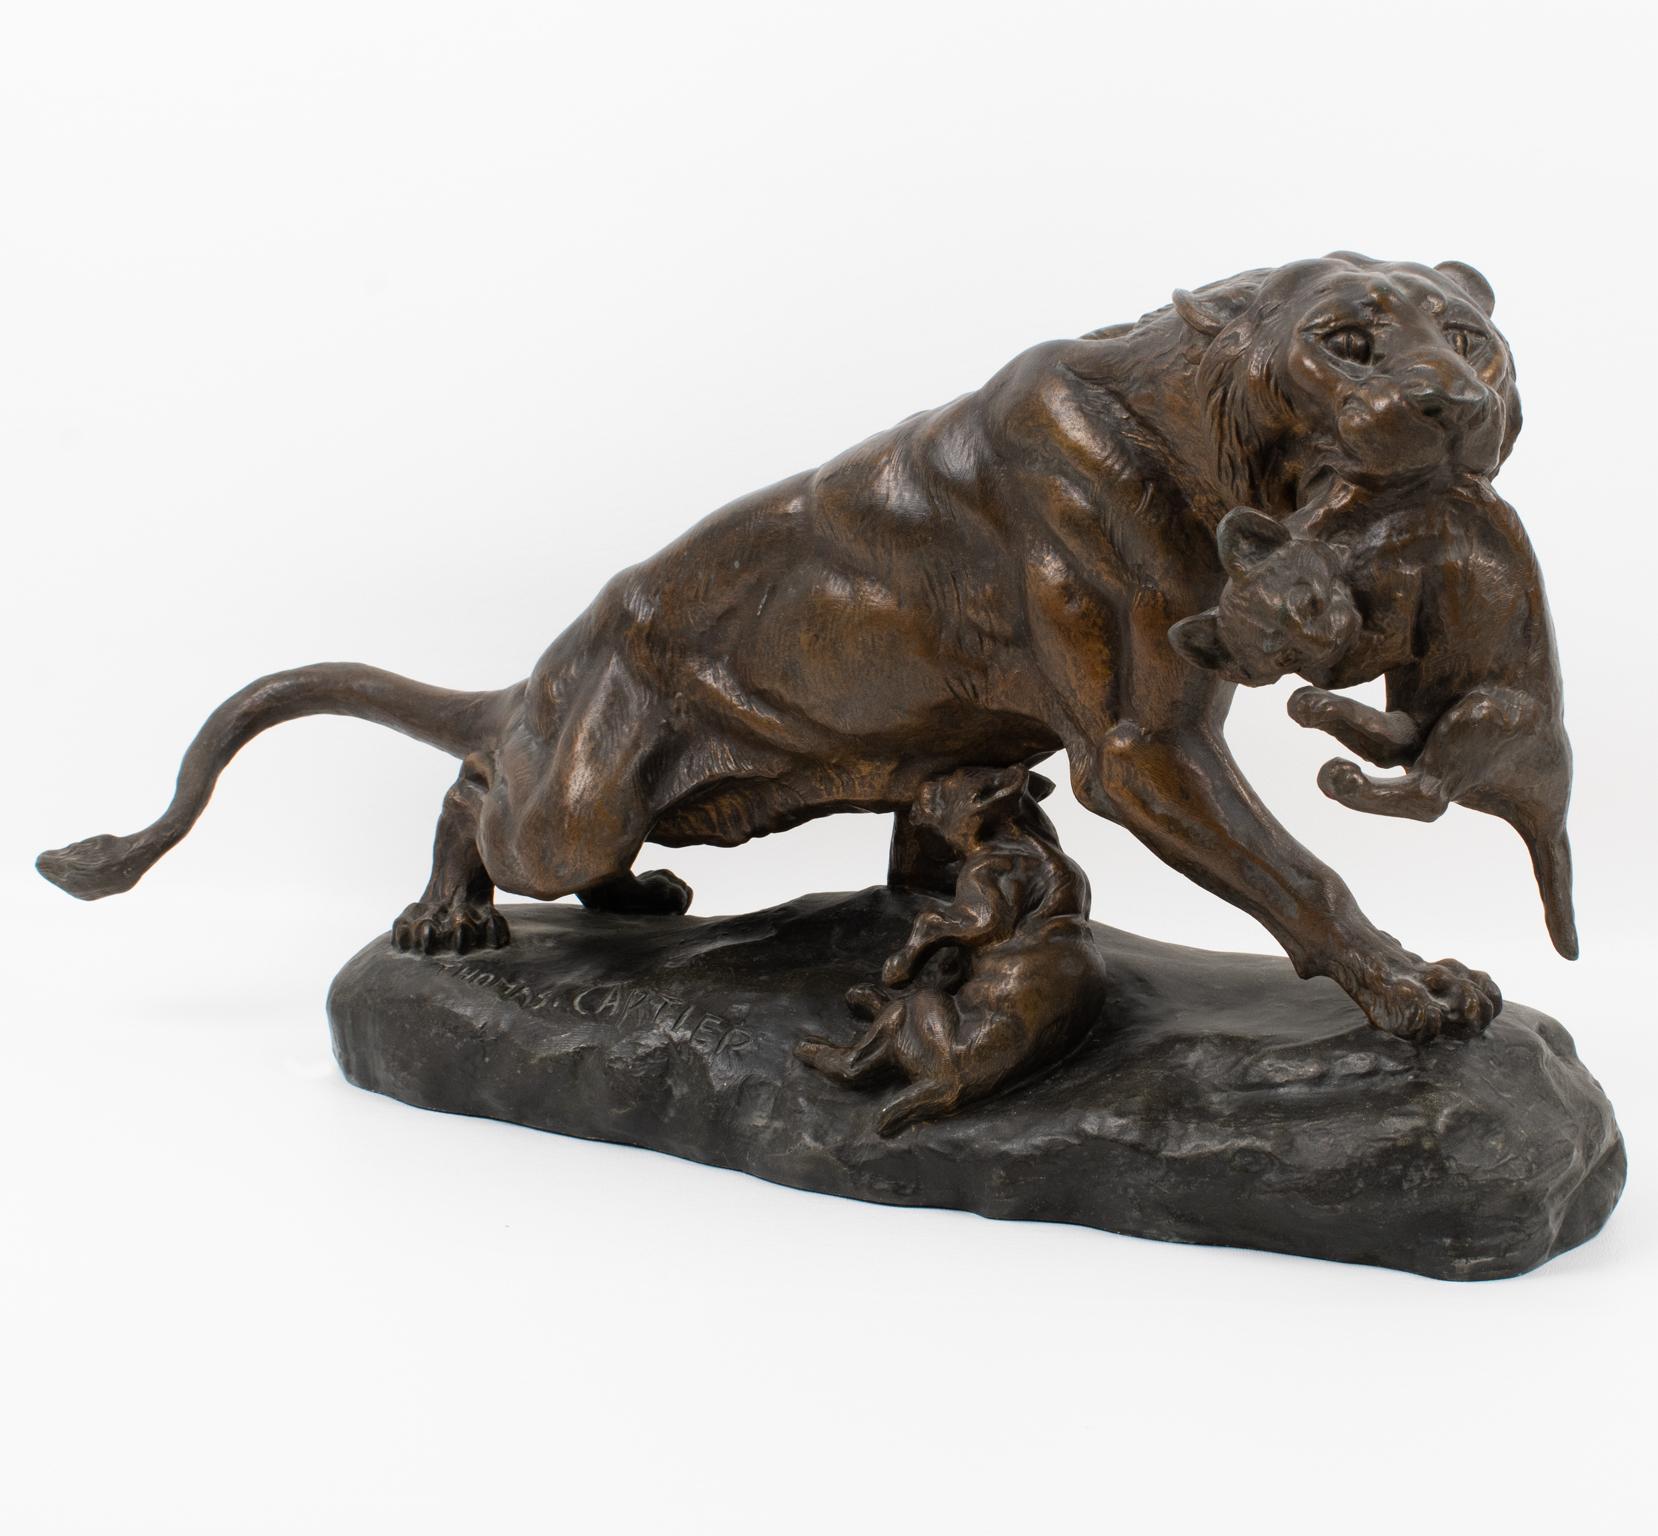 Thomas Francois Cartier (1879 - 1943) designed this spectacular cast spelter sculpture during the Art Deco period in France in the 1920s. The artwork features a lioness with two cubs. This artwork design is refined and powerful, showing the